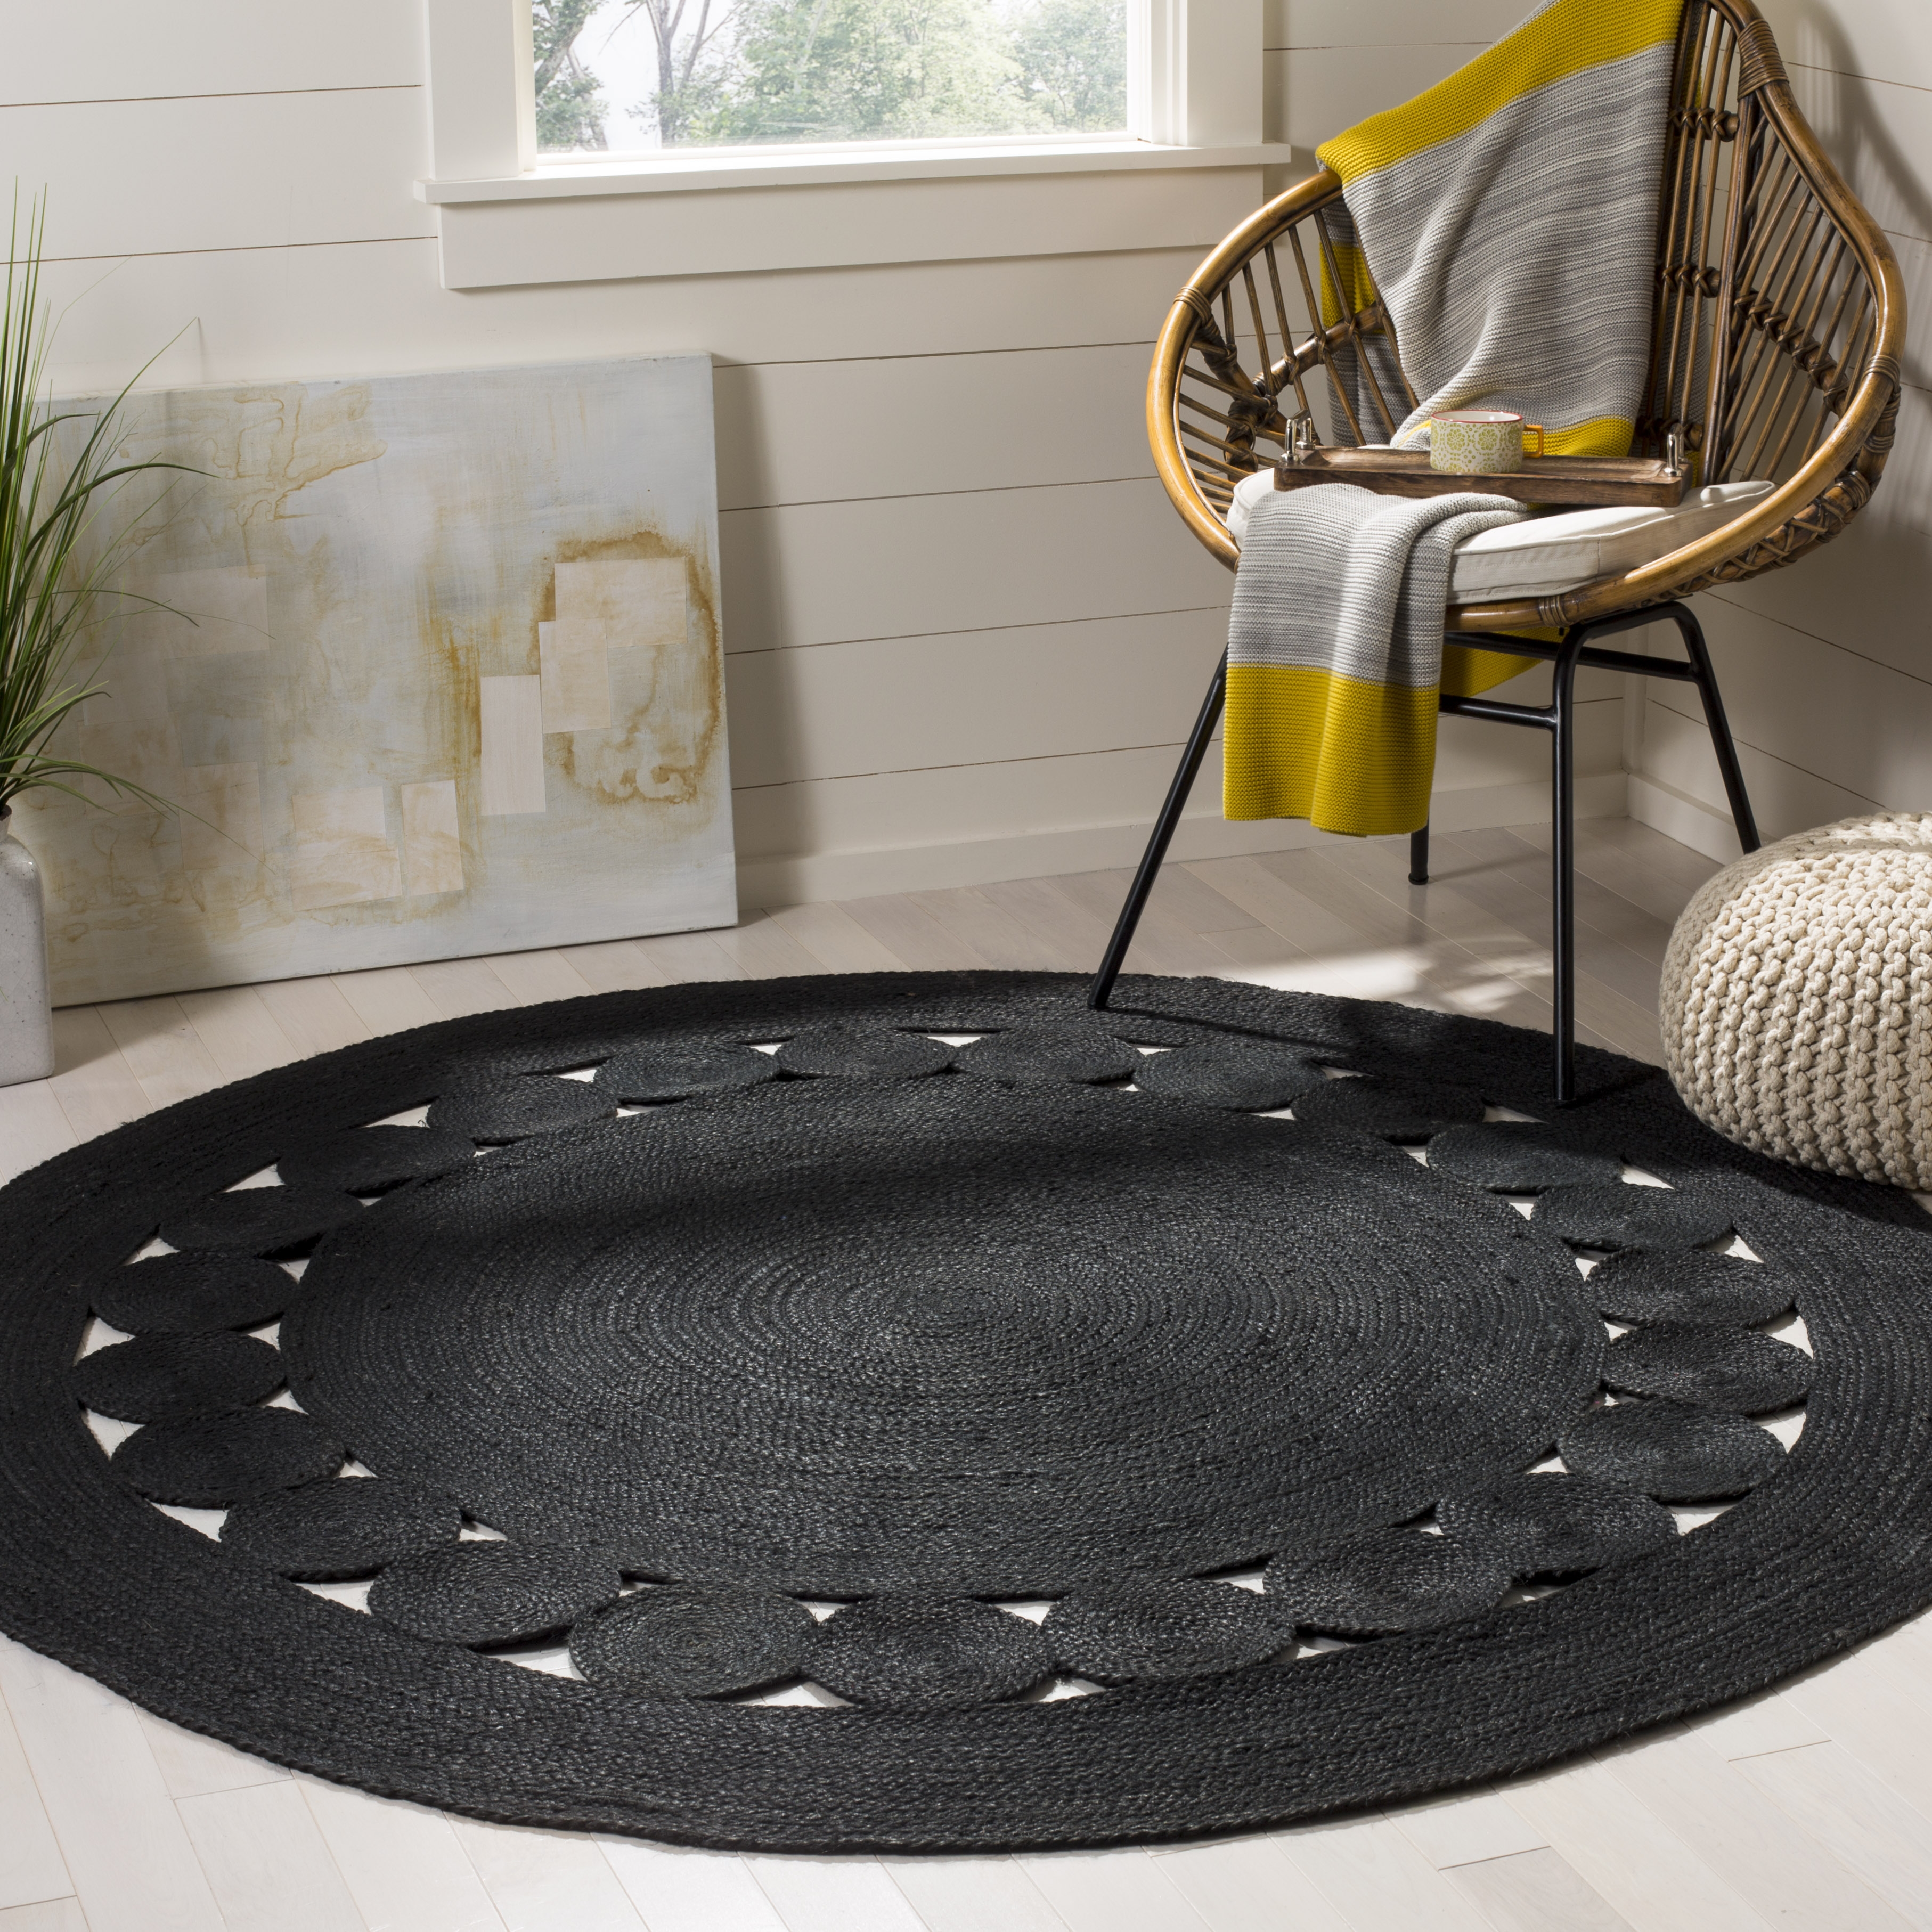 Safavieh Hand Woven Area Rug, NF364D, Black,  5' X 5' Round - Image 1